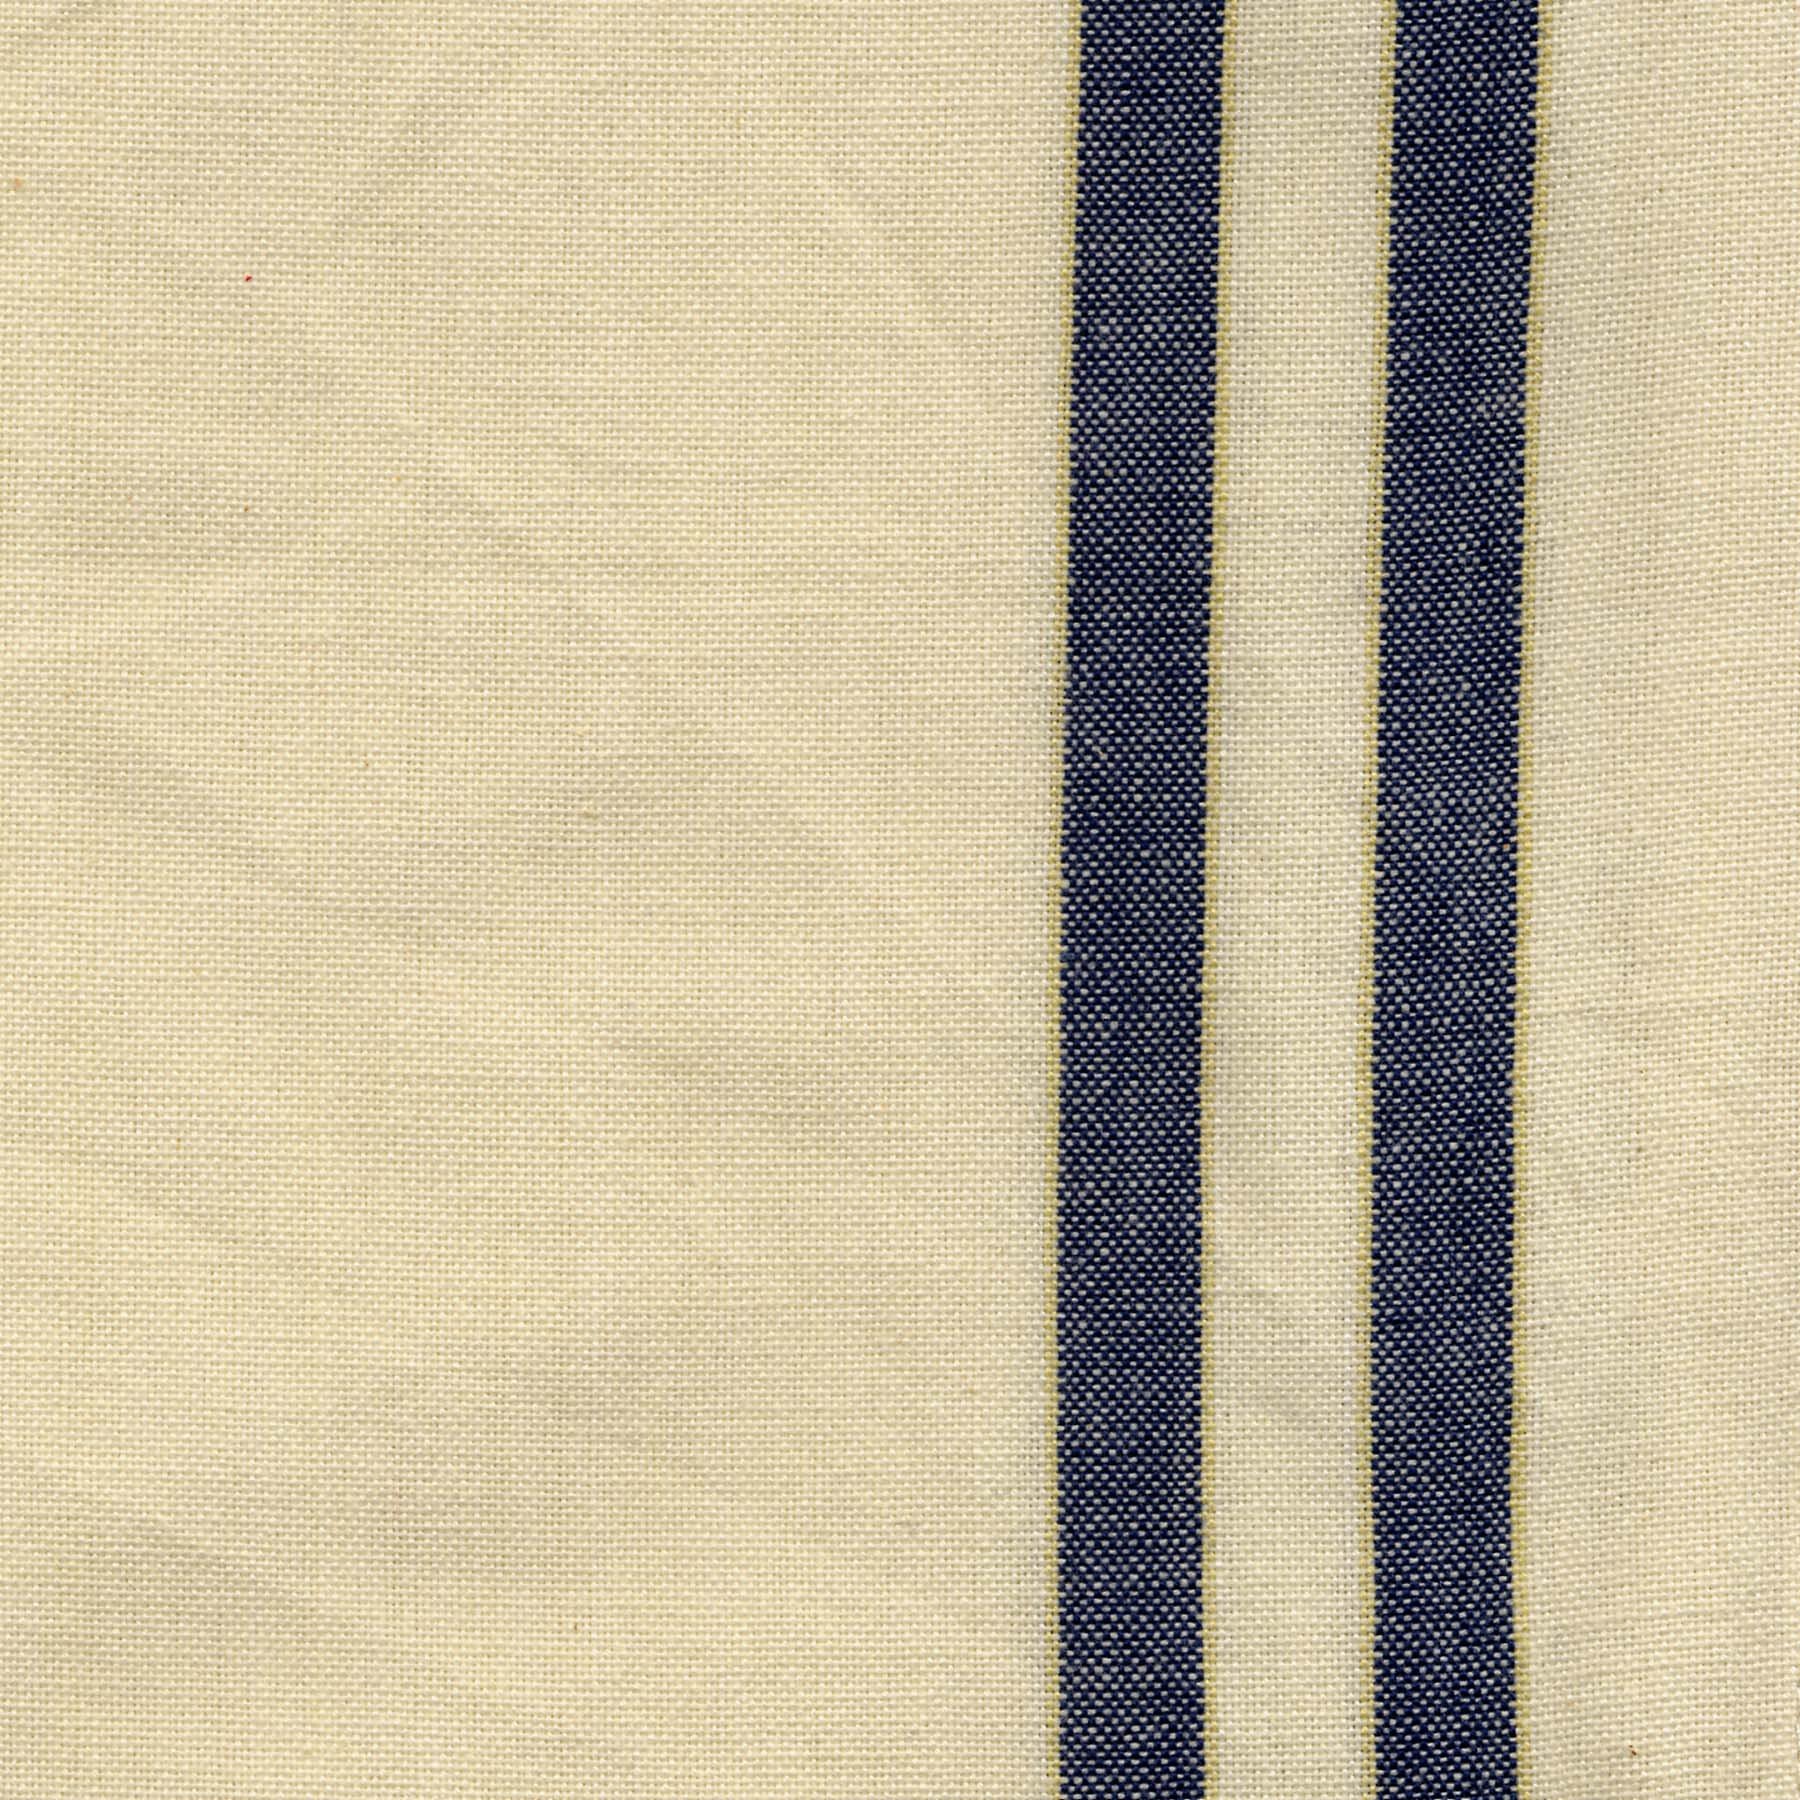 Dunroven House Cream Towel, 20 x 29-Inch, Navy and Dijon Stripe